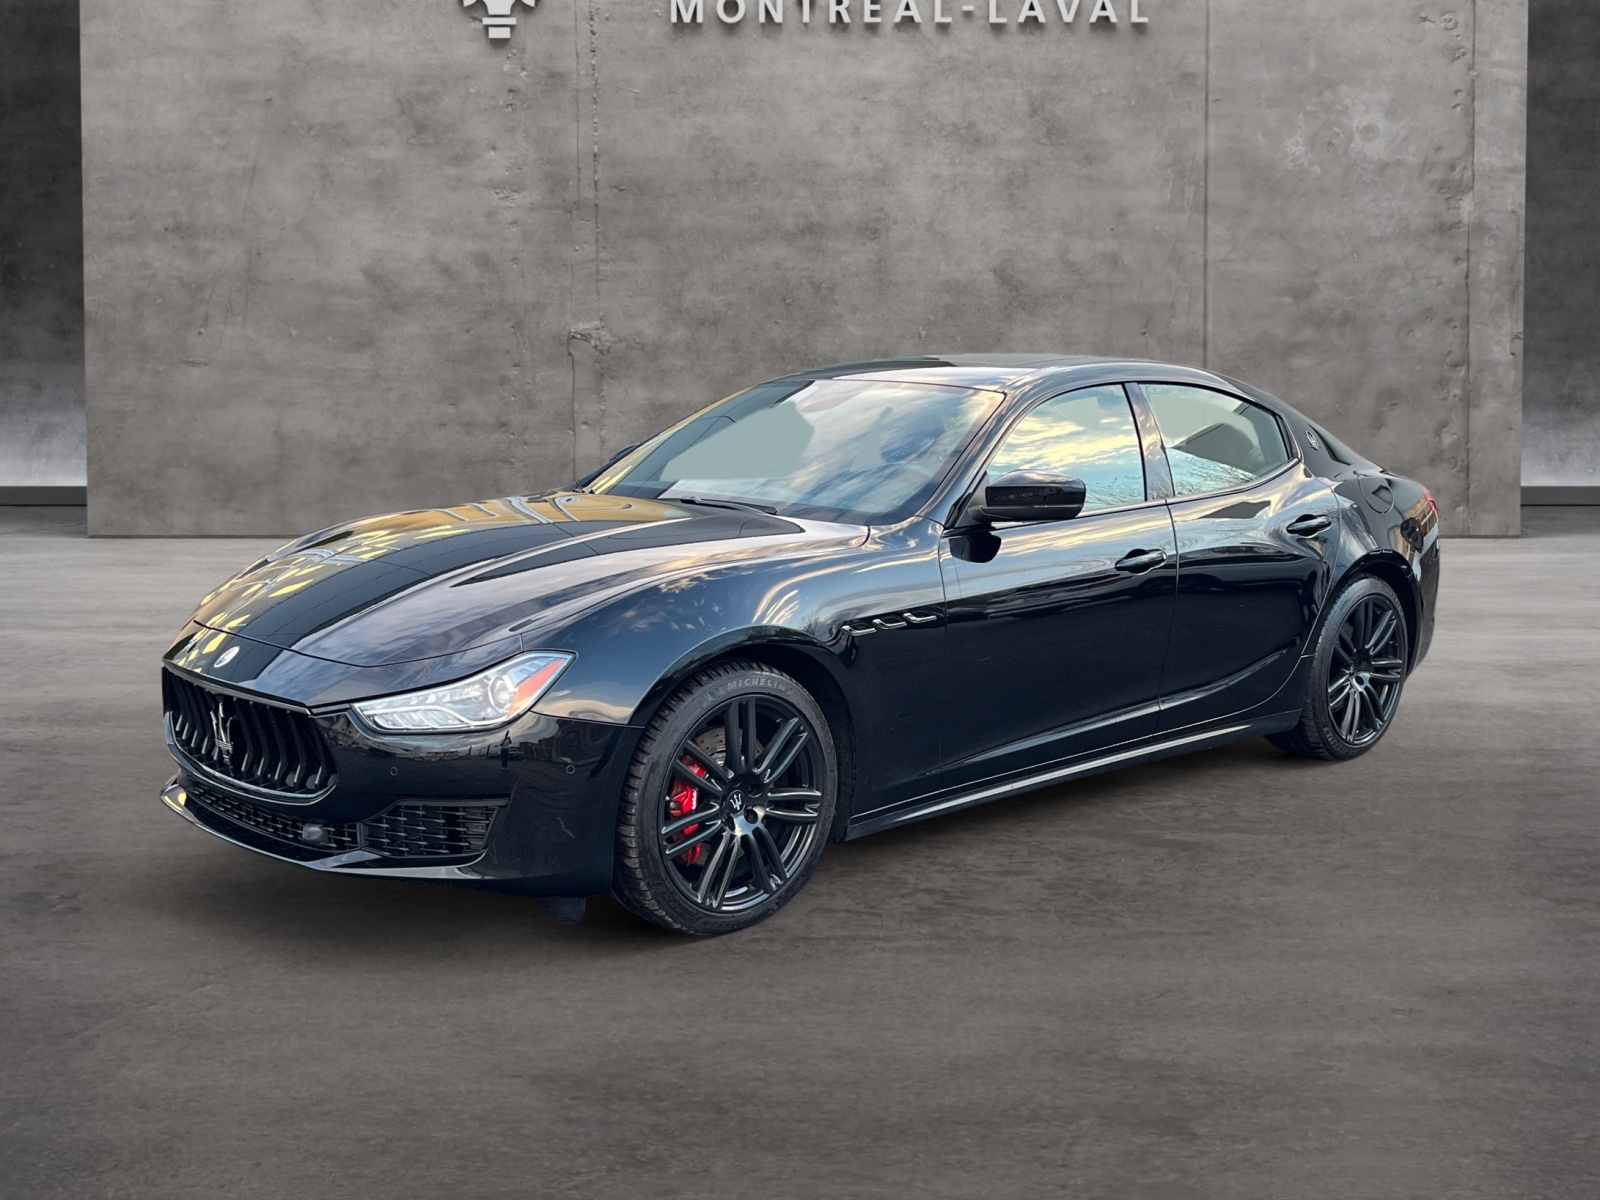 2020 Maserati Ghibli ***277$ weekly payment on 84months***